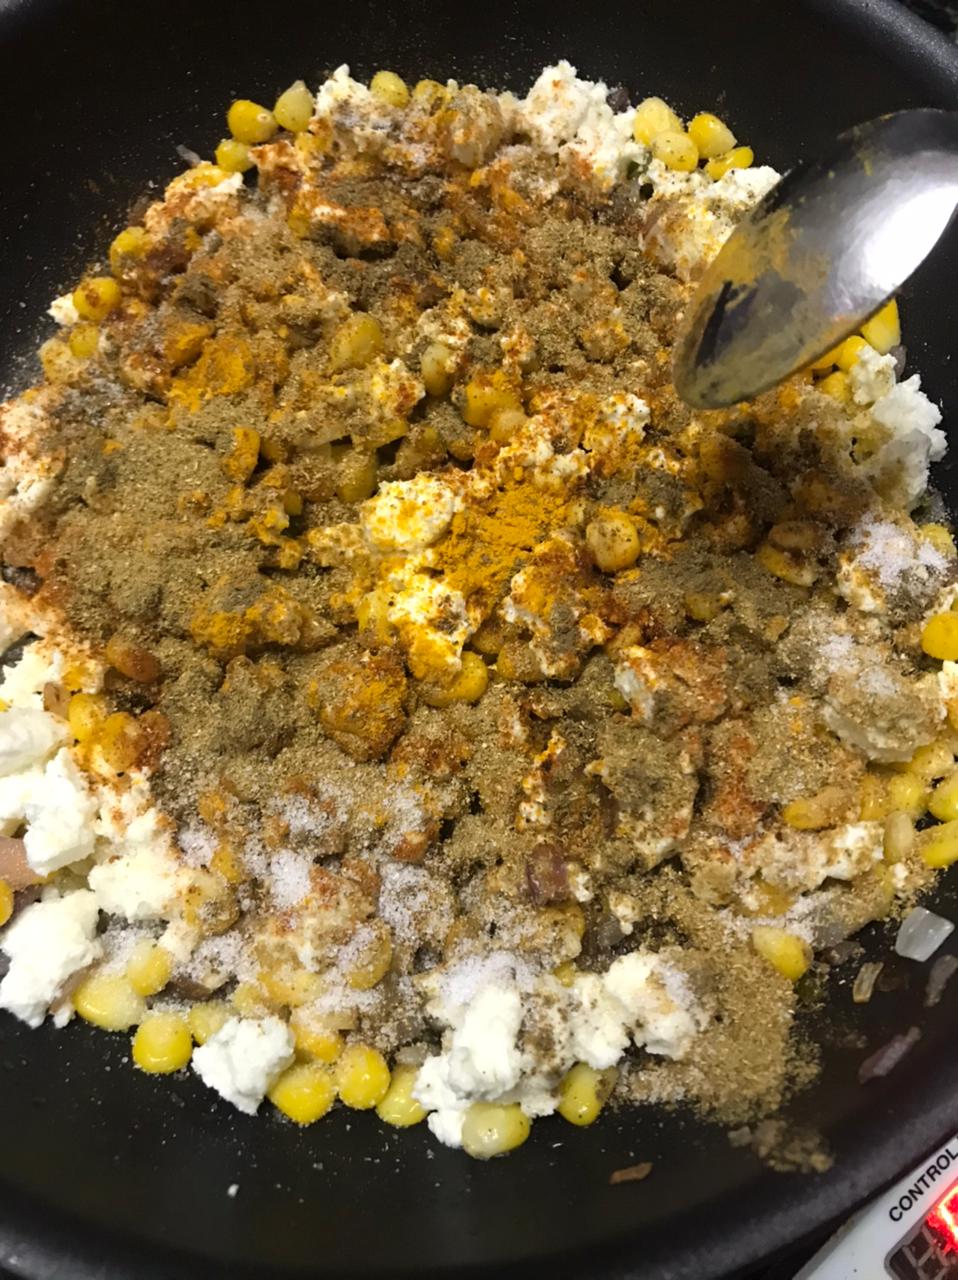 Spices added to the bhurji in a pan